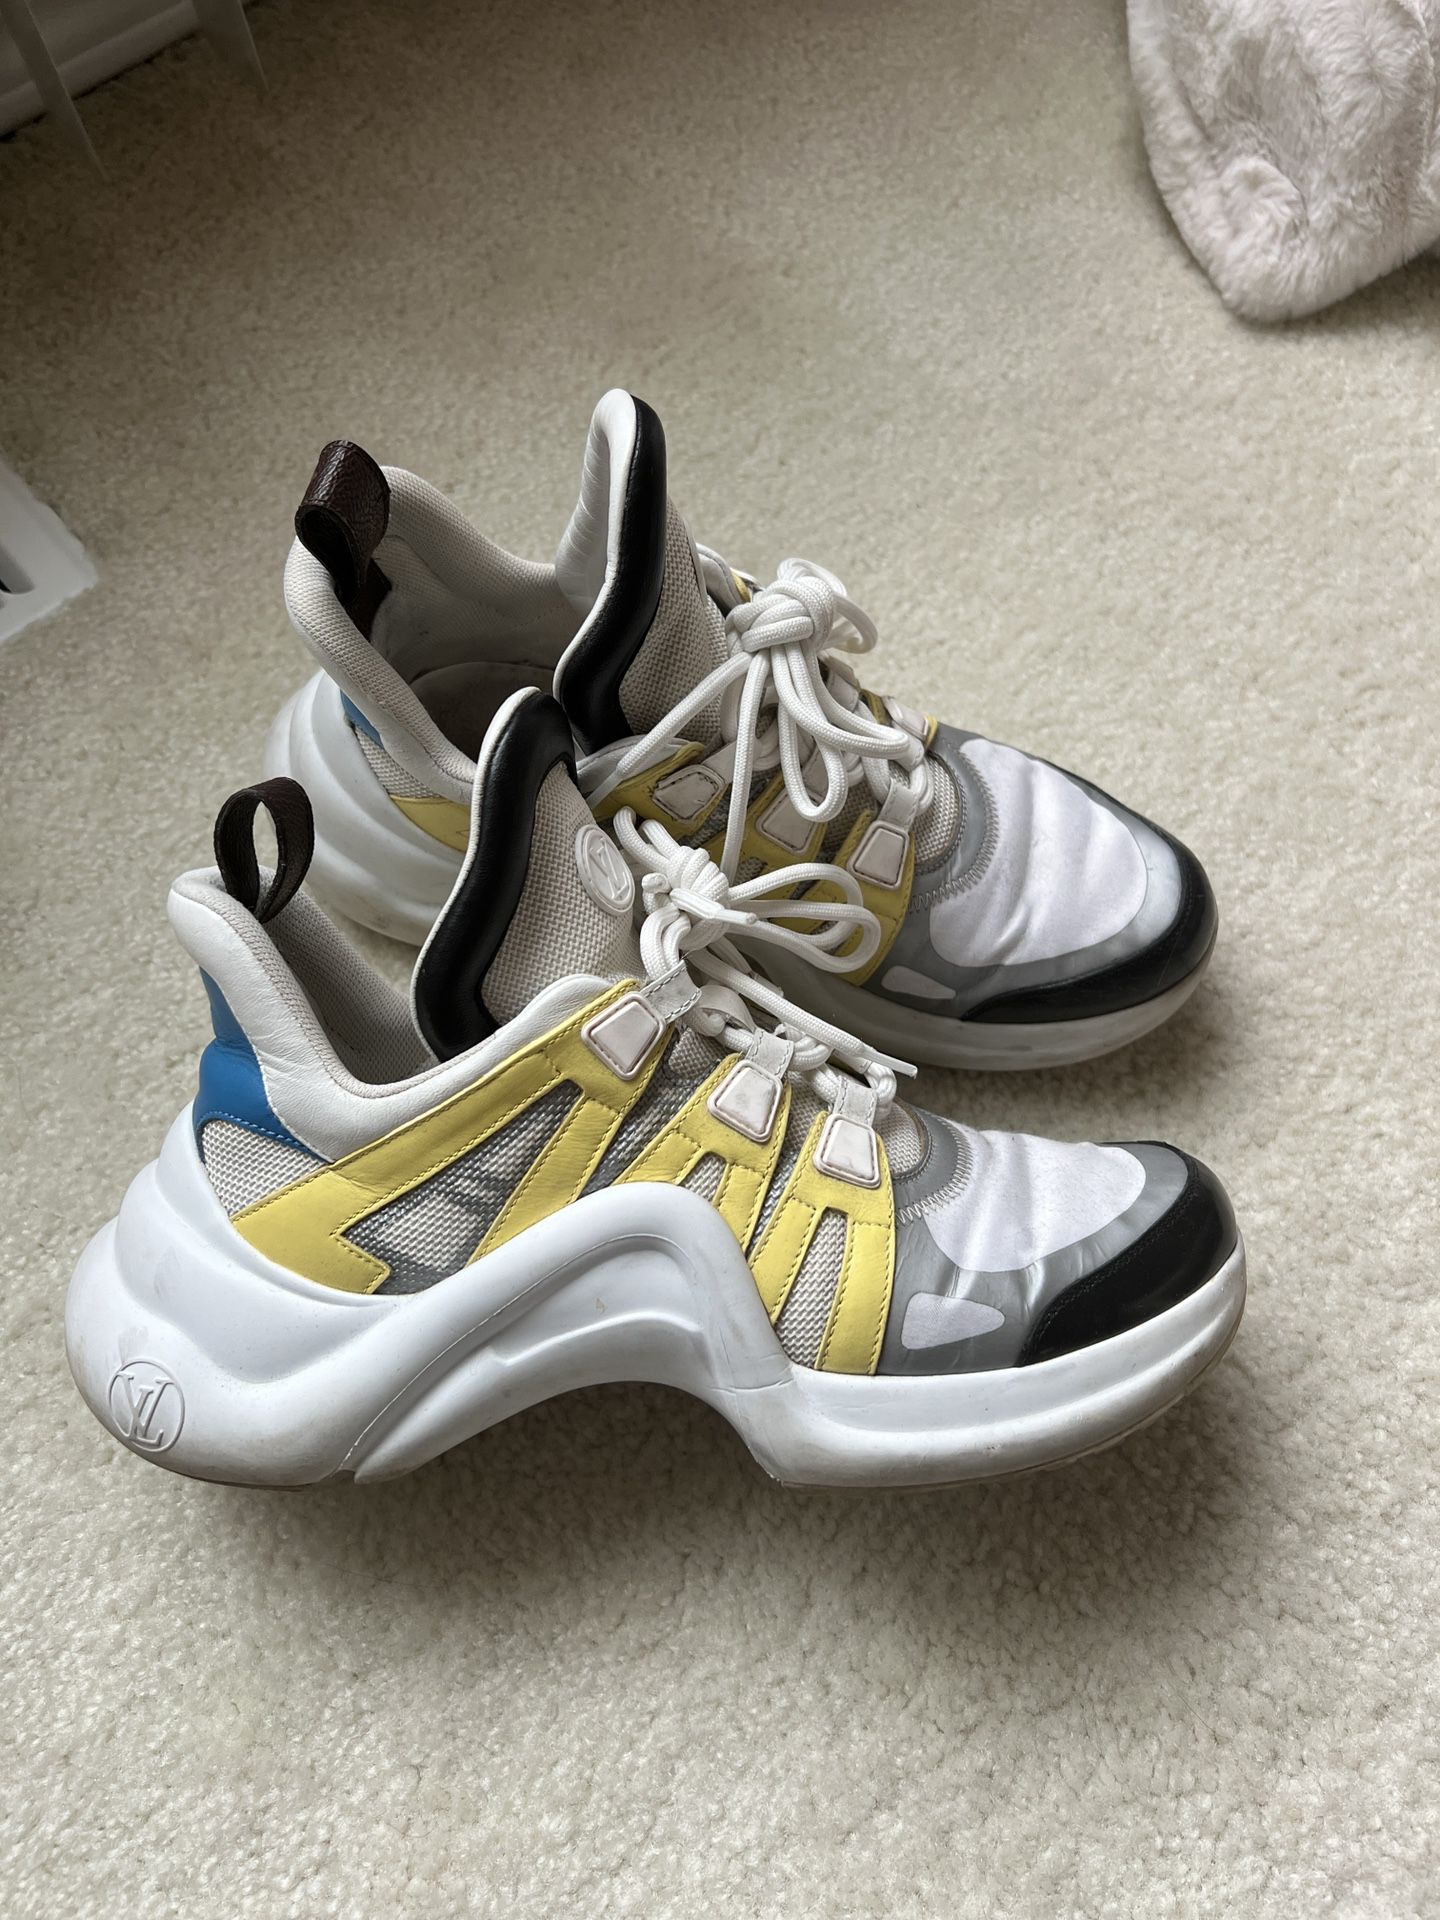 Authentic Louis Vuitton Archlight Sneakers 39 for Sale in Renton, WA -  OfferUp